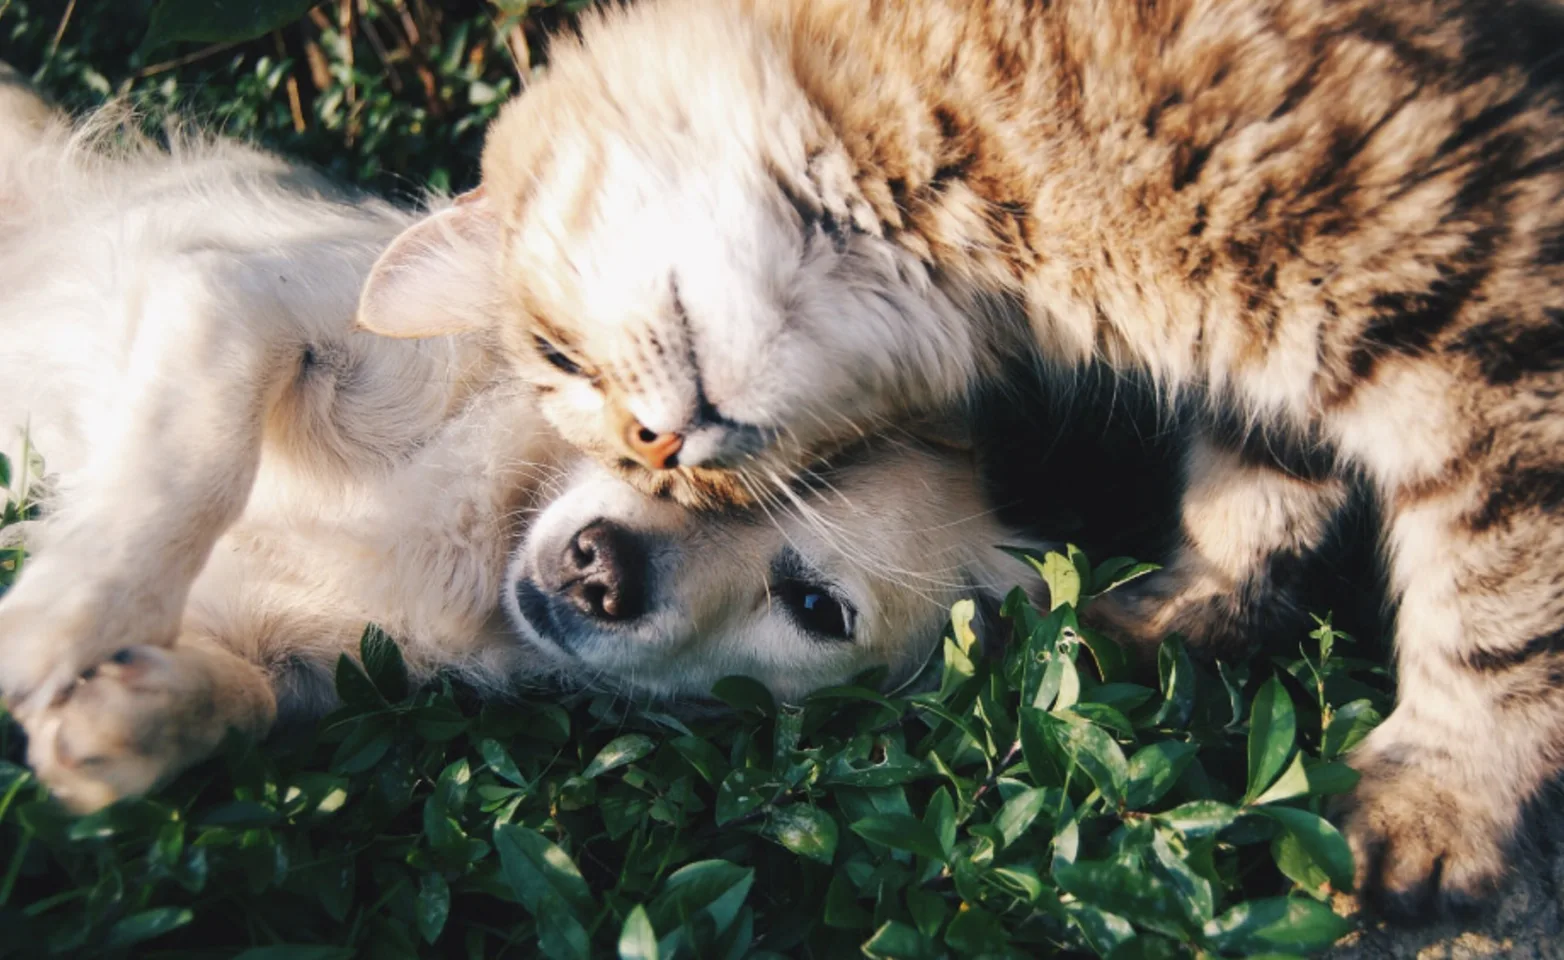 Dog and cat relaxing next to each other laying on grass